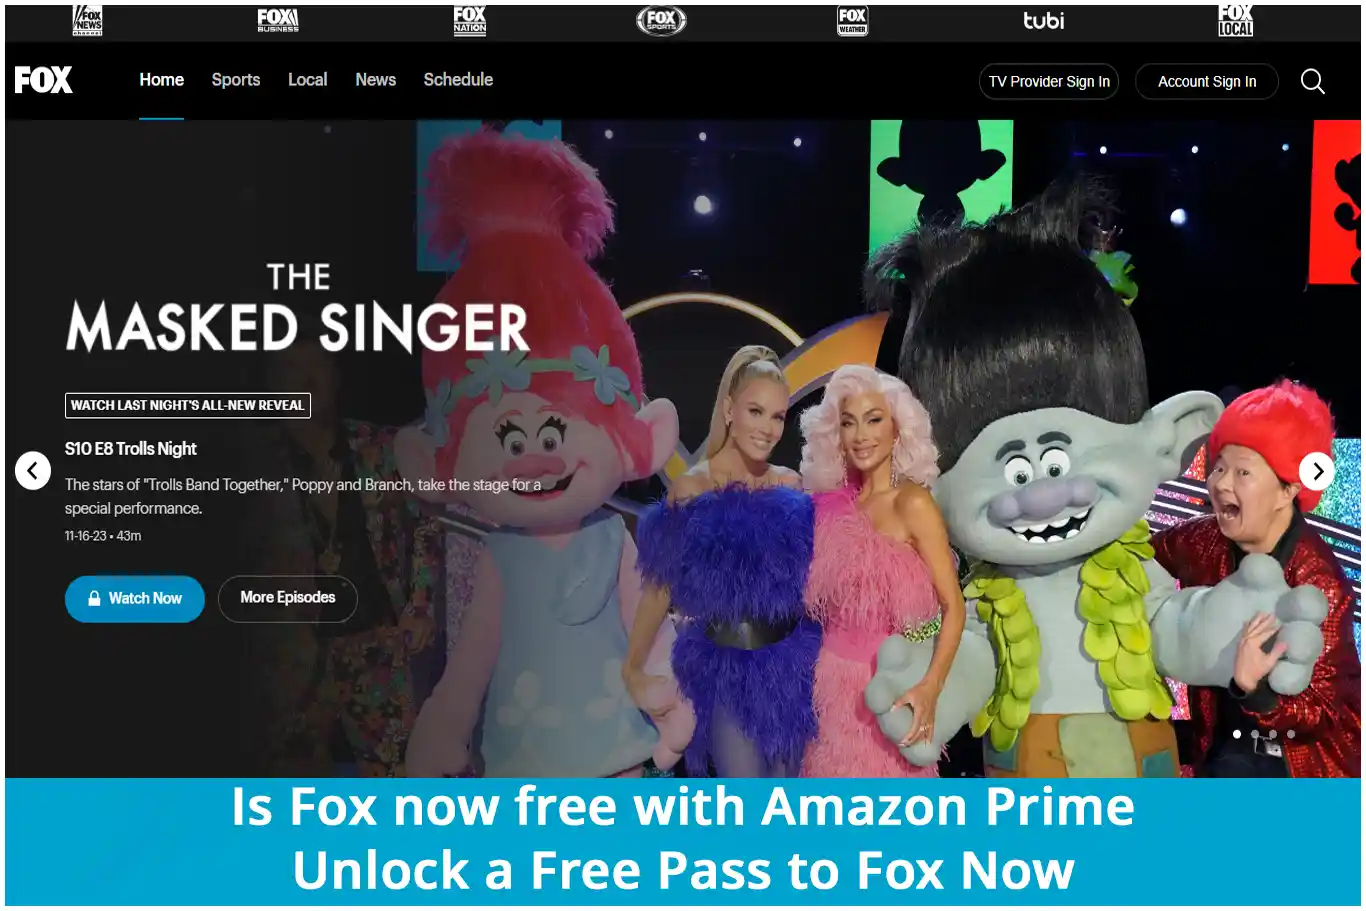 Is Fox now free with Amazon Prime